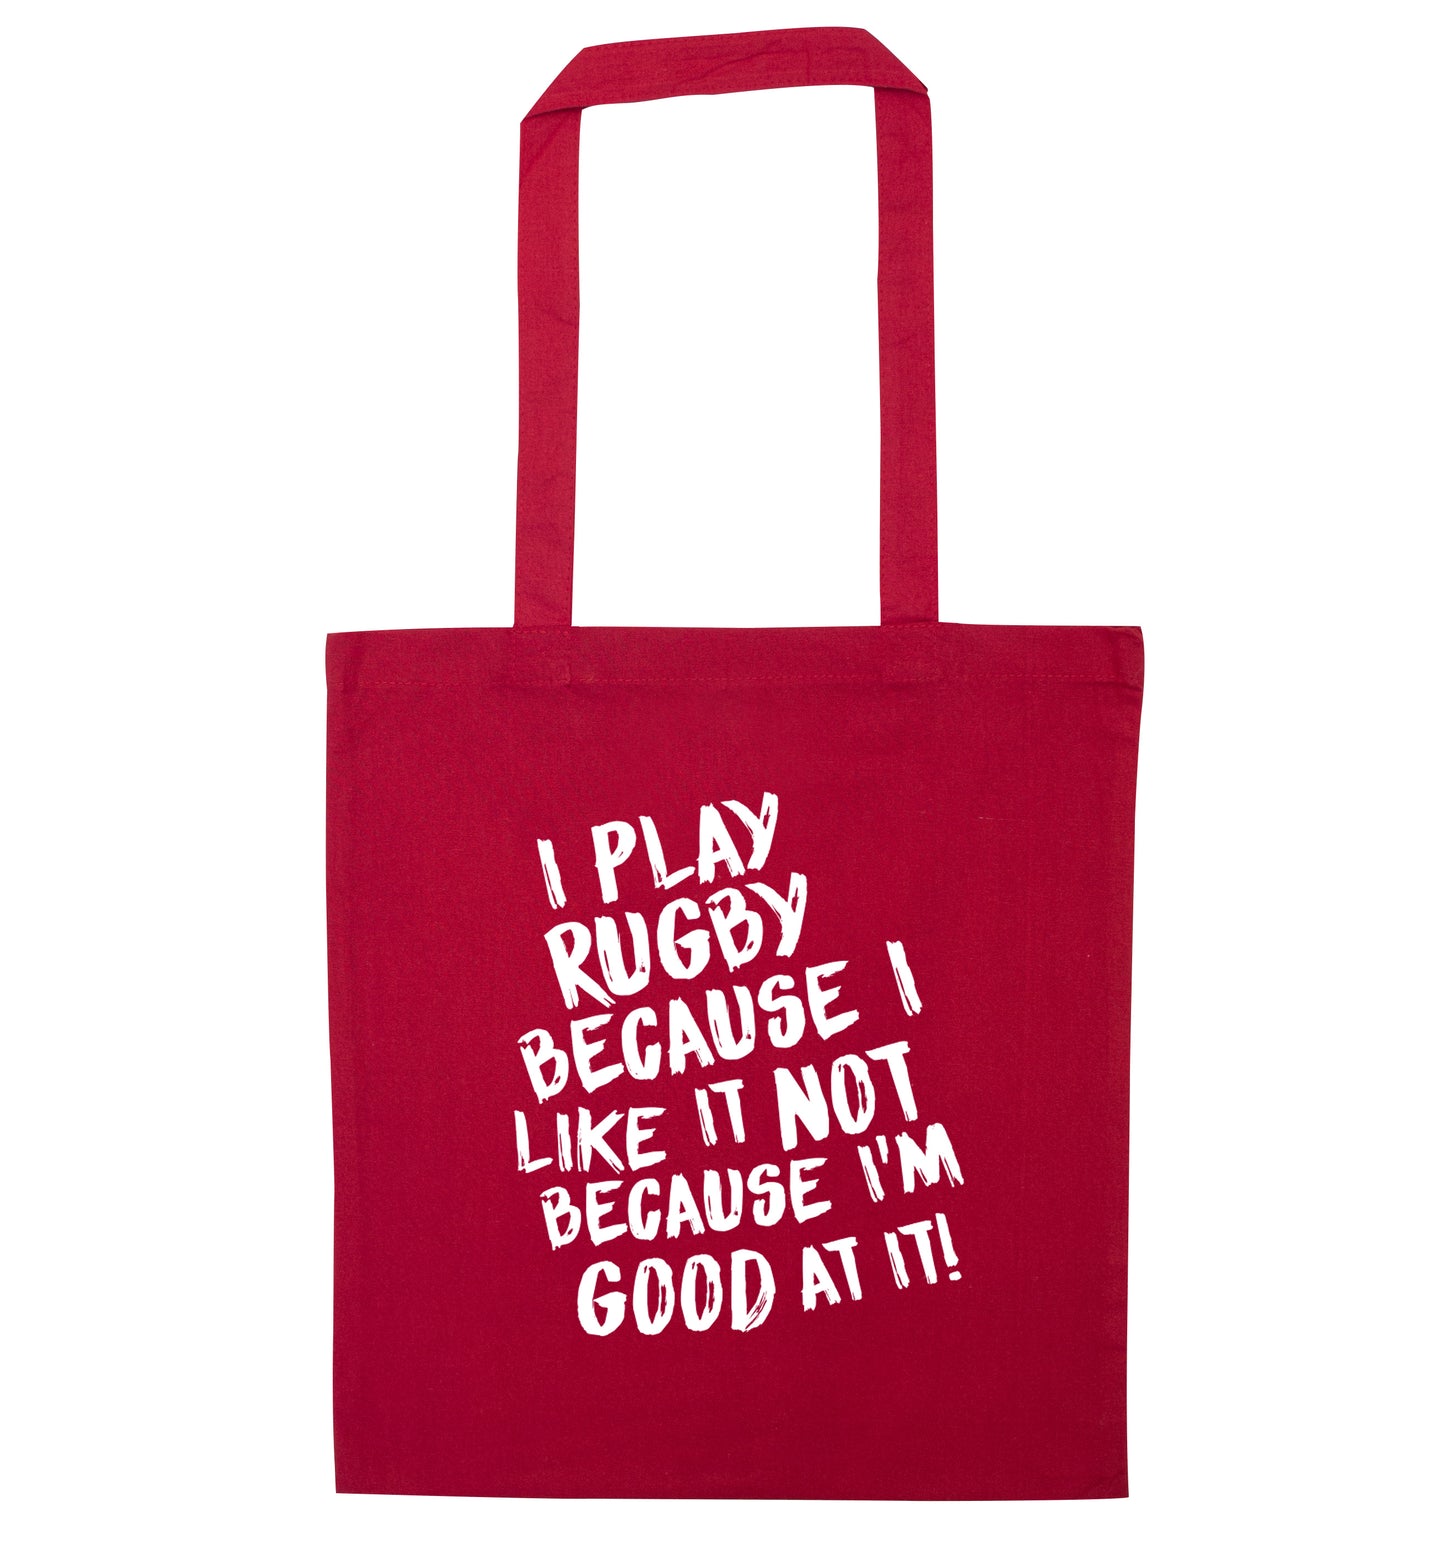 I play rugby because I like it not because I'm good at it red tote bag